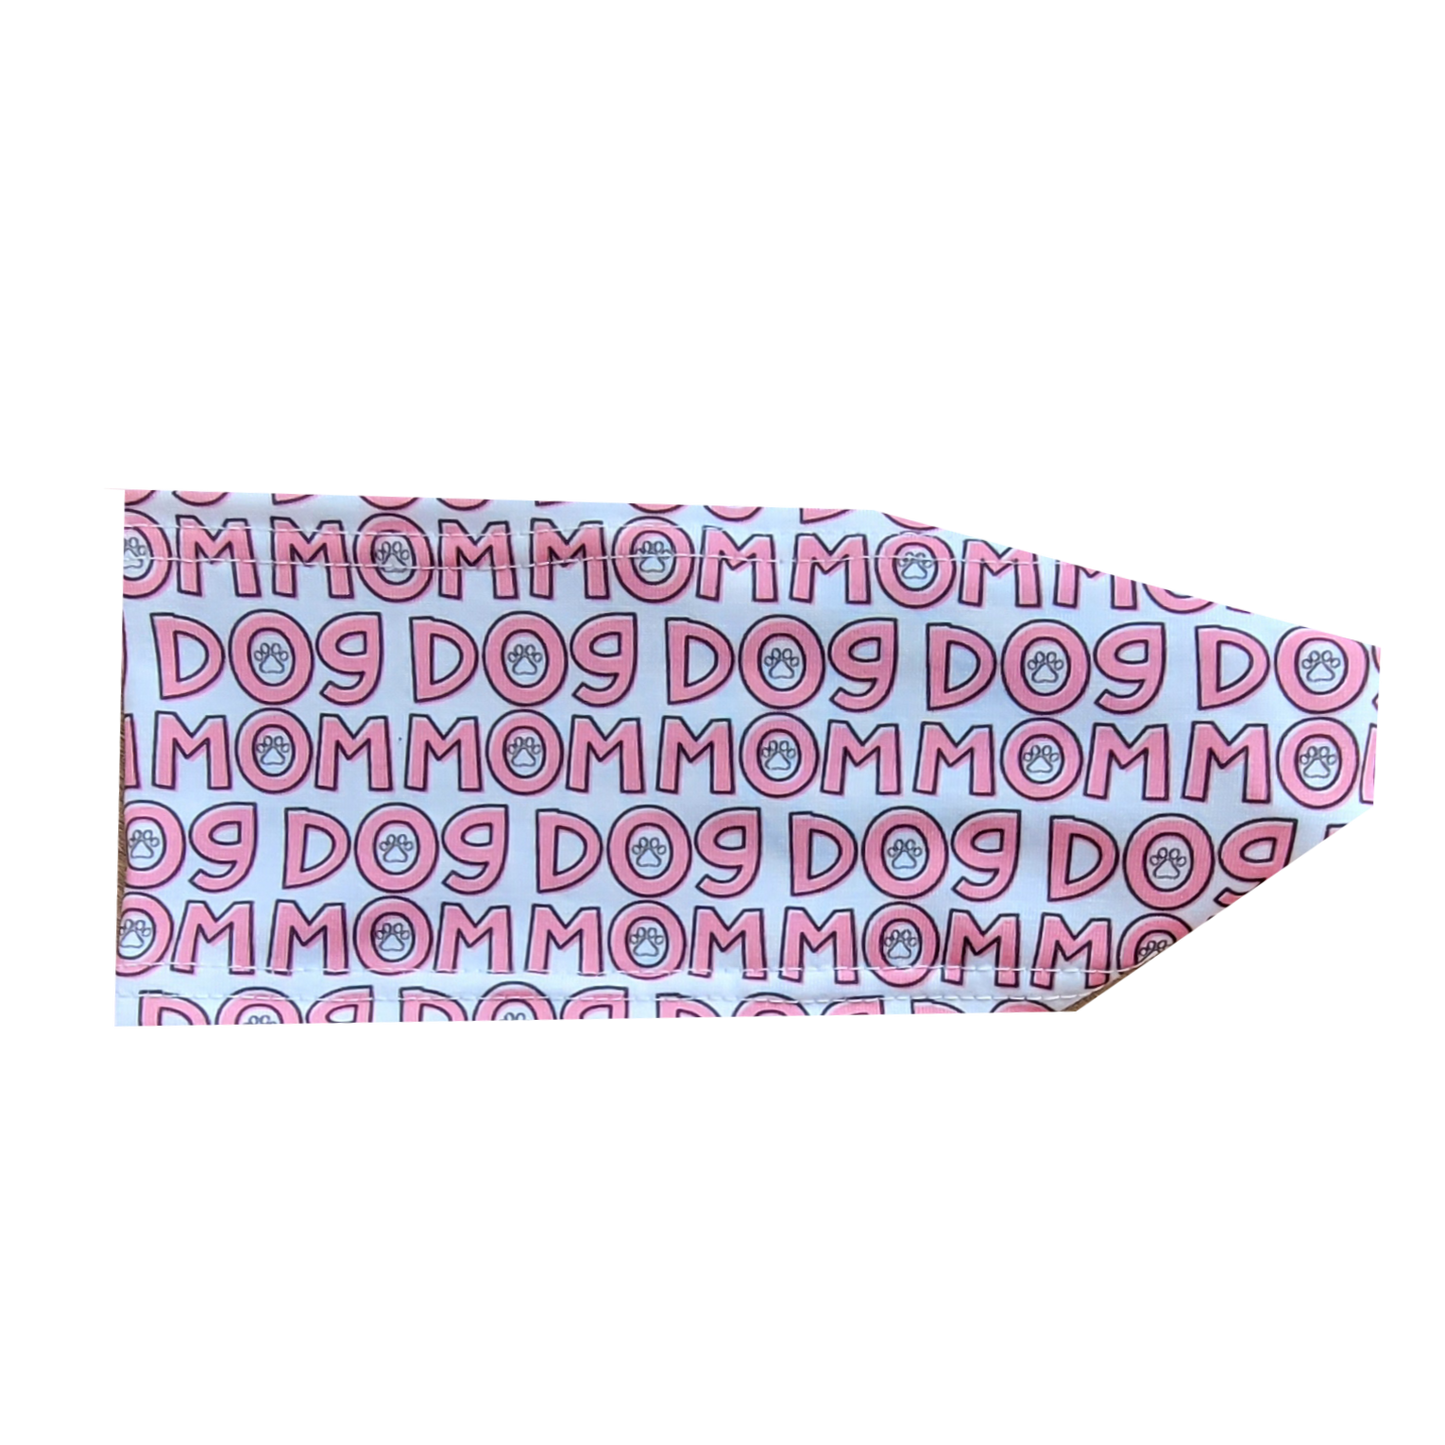 Headband with dog mom written in pink on white